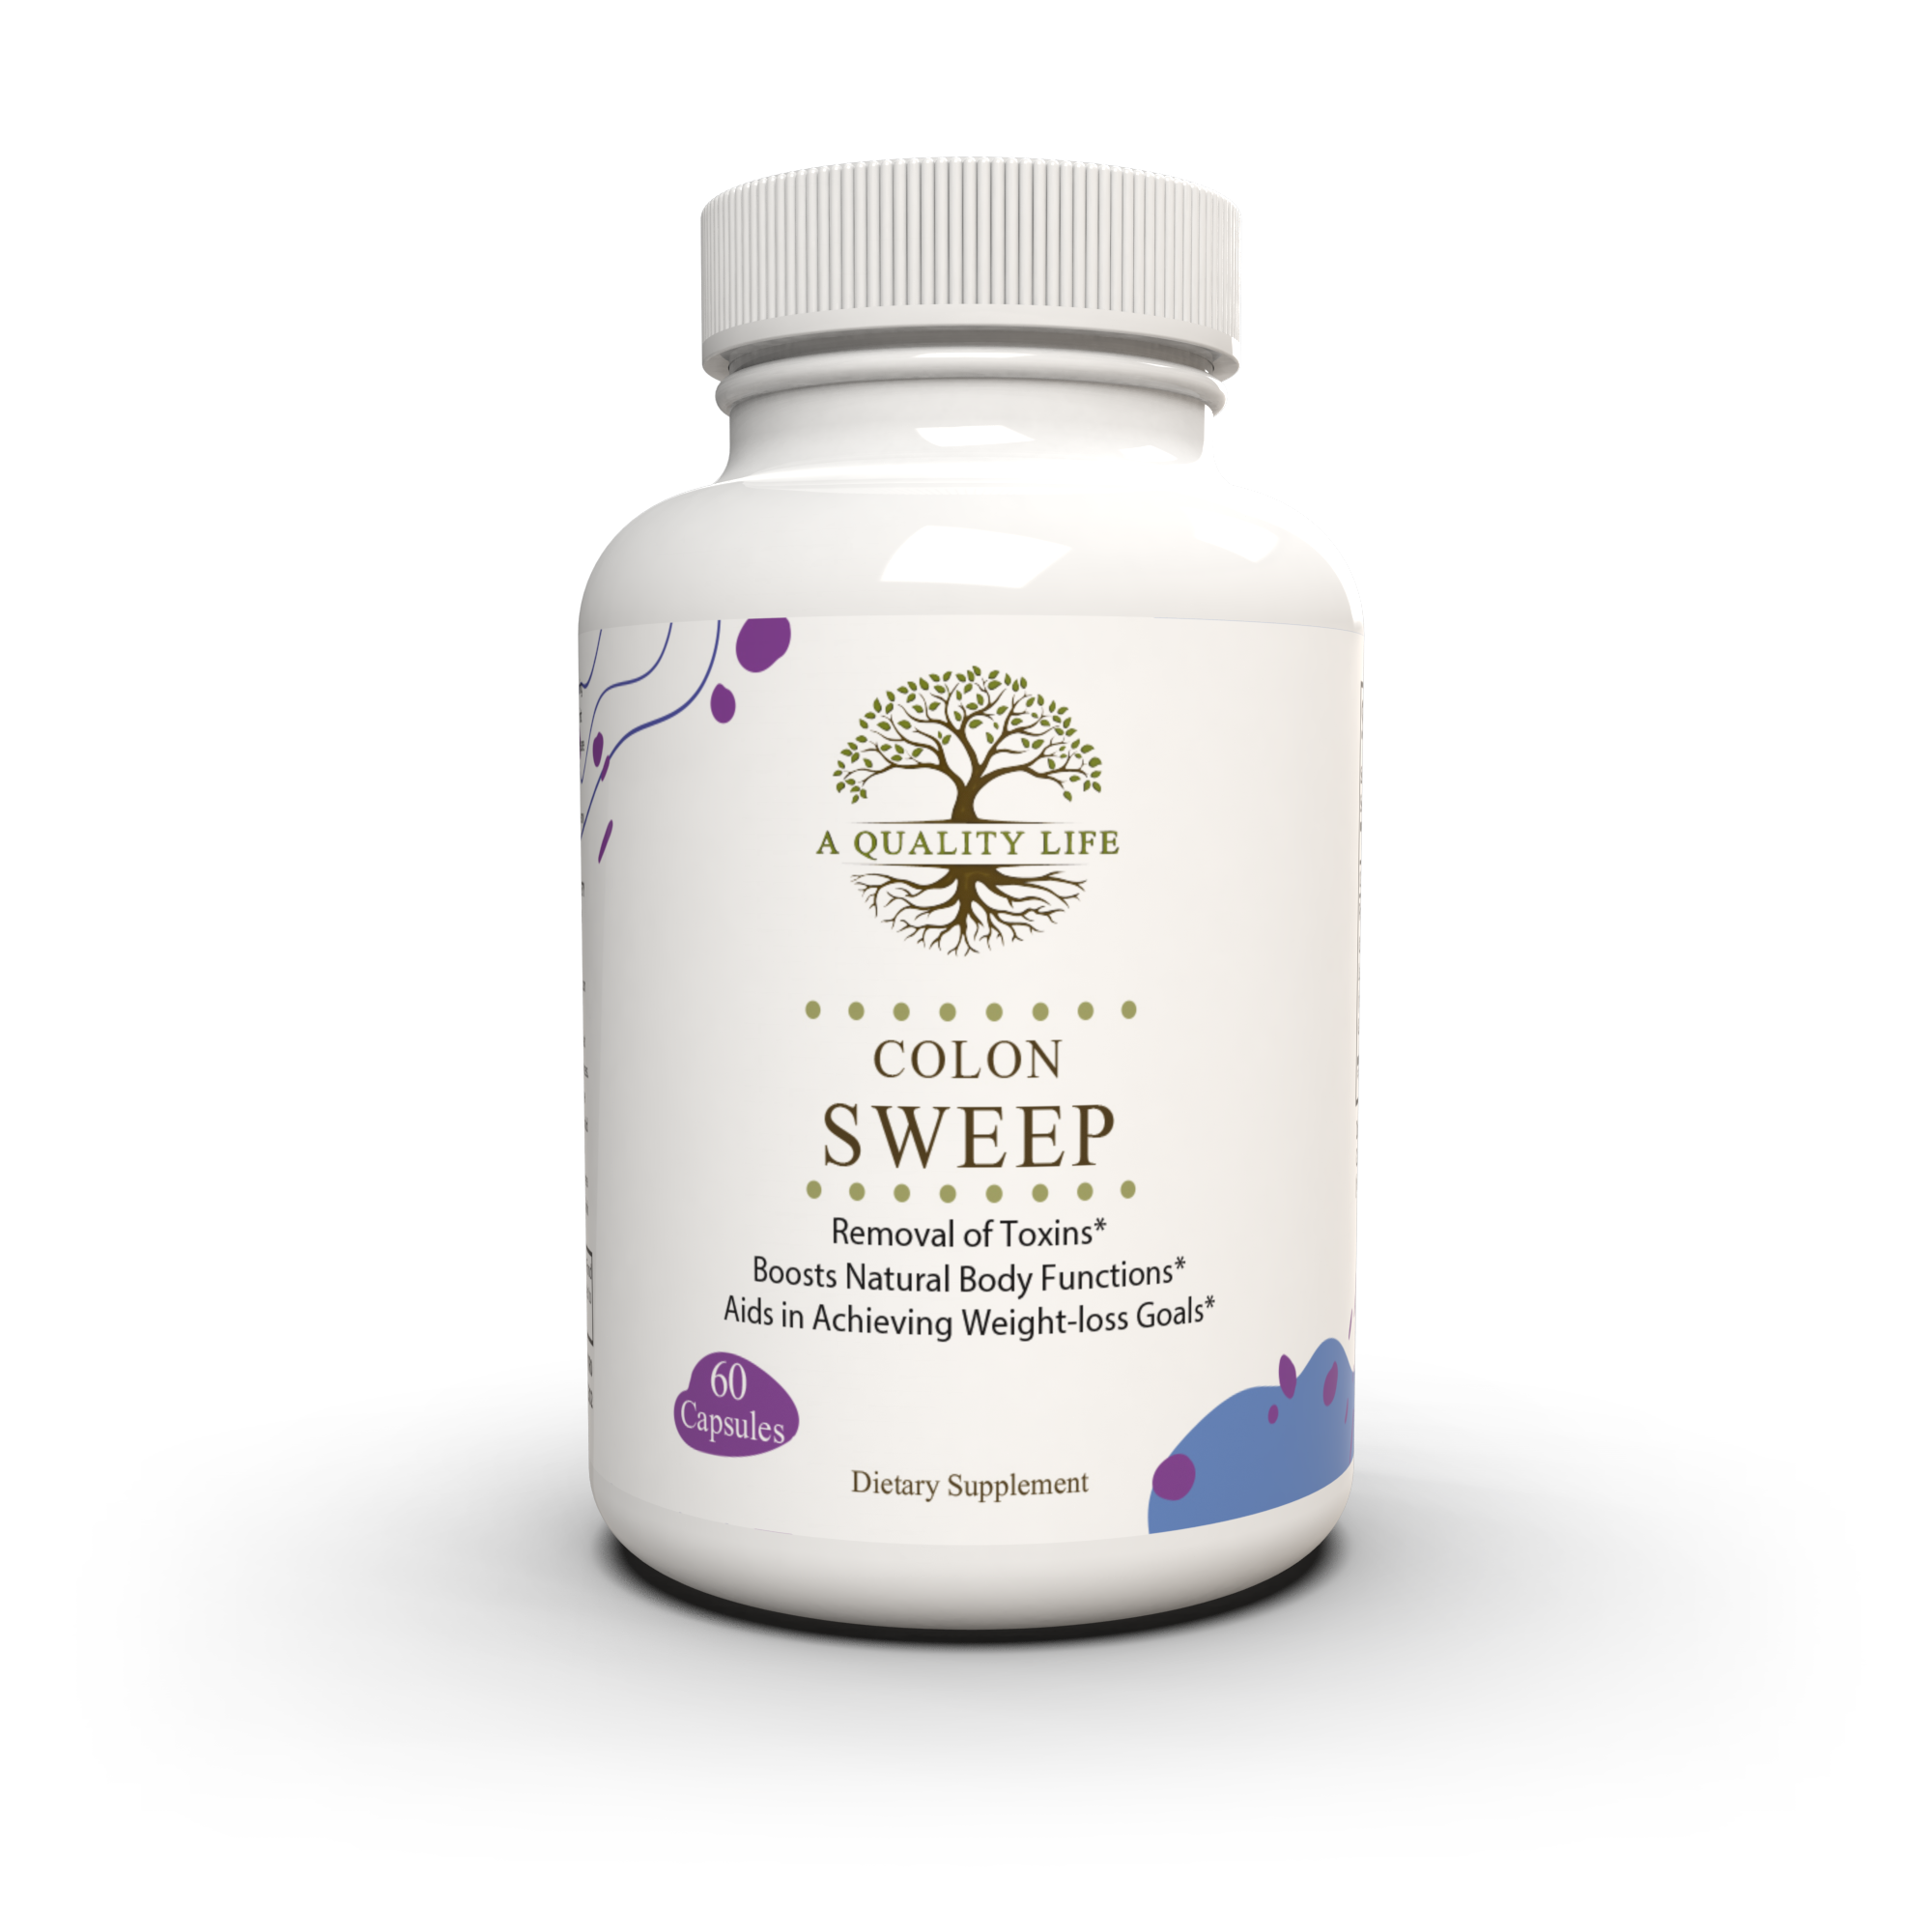 Colon Sweep by A Quality Life Nutrition